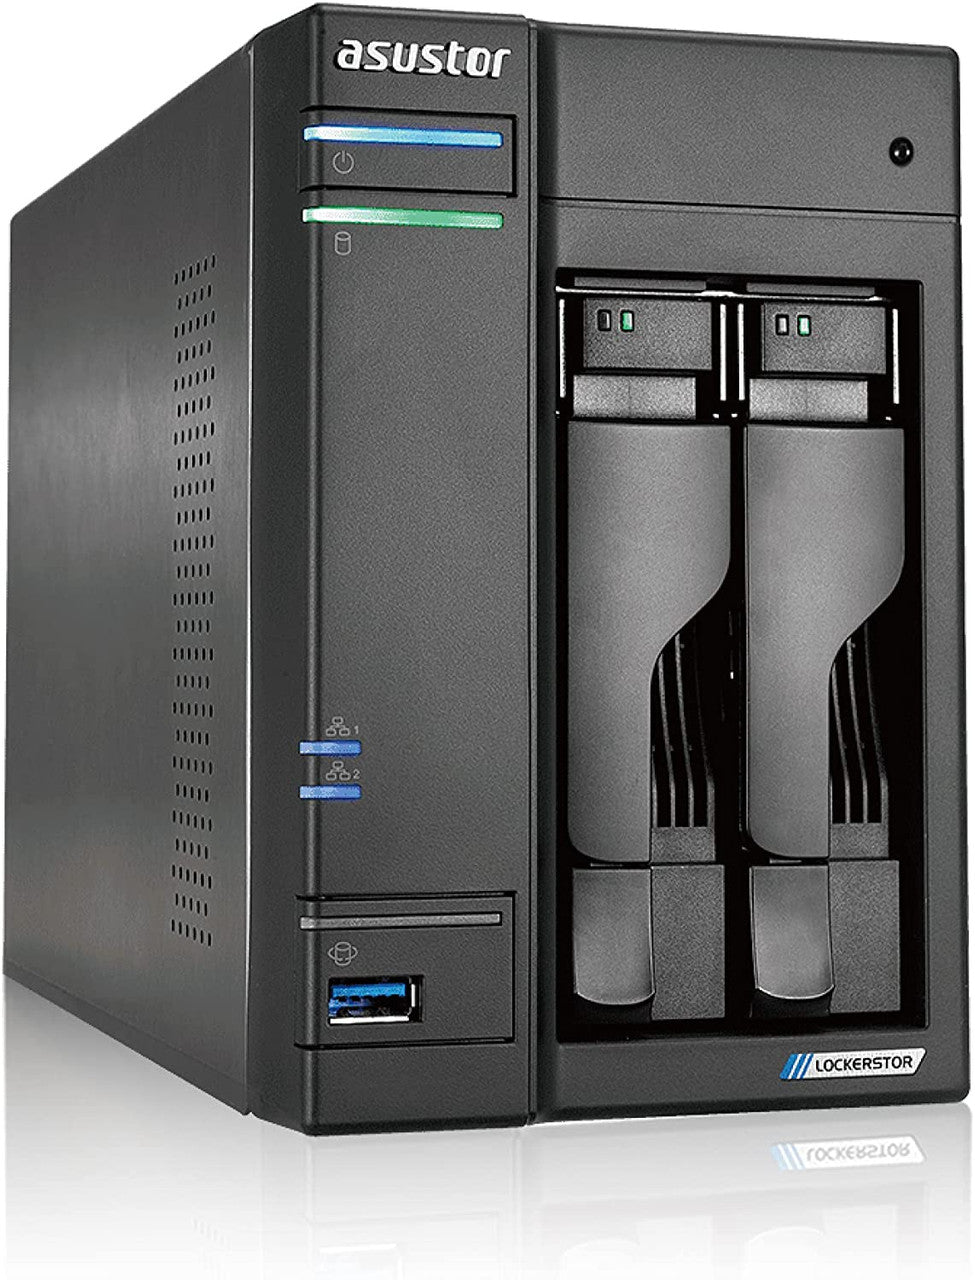 Asustor AS6602T 2-Bay Lockerstor 2 NAS with 8GB RAM 2TB (2 x 1TB) NVME CACHE and 8TB (2x4TB) Seagate Ironwolf PRO Drives